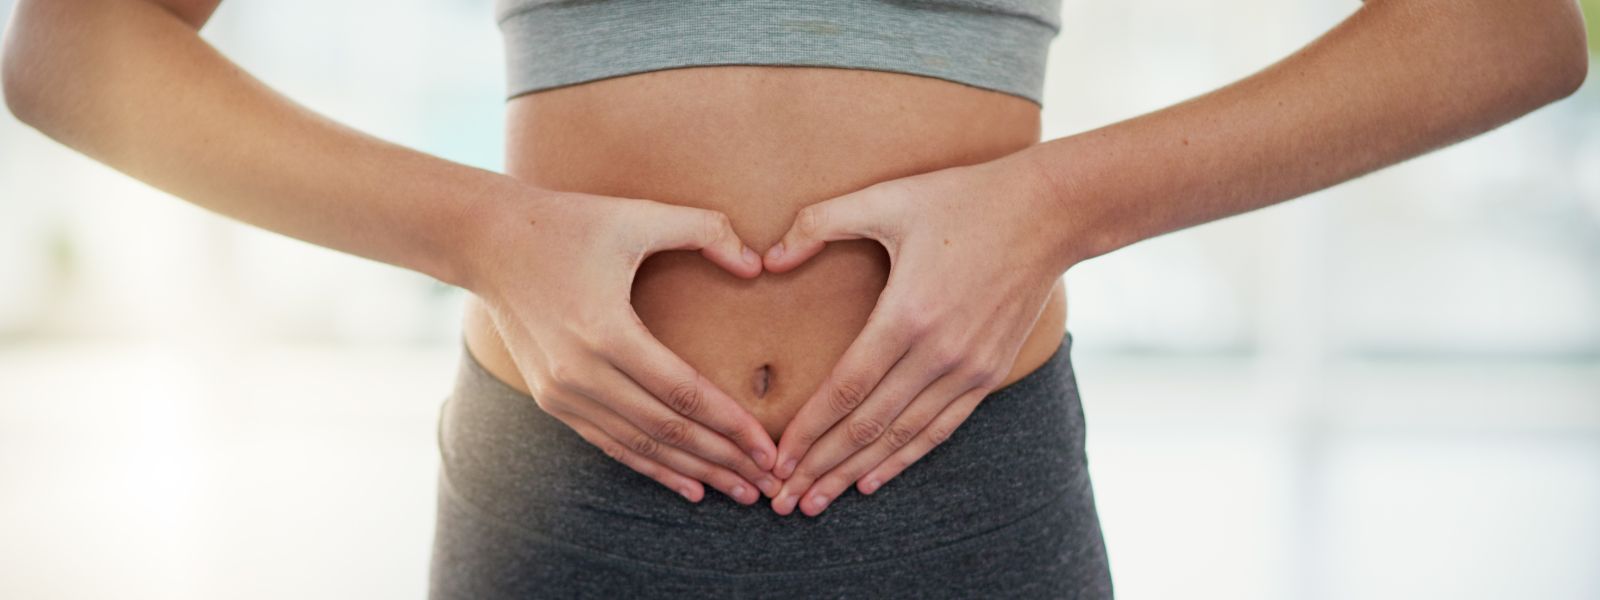 female body using hands to make heart over the gut